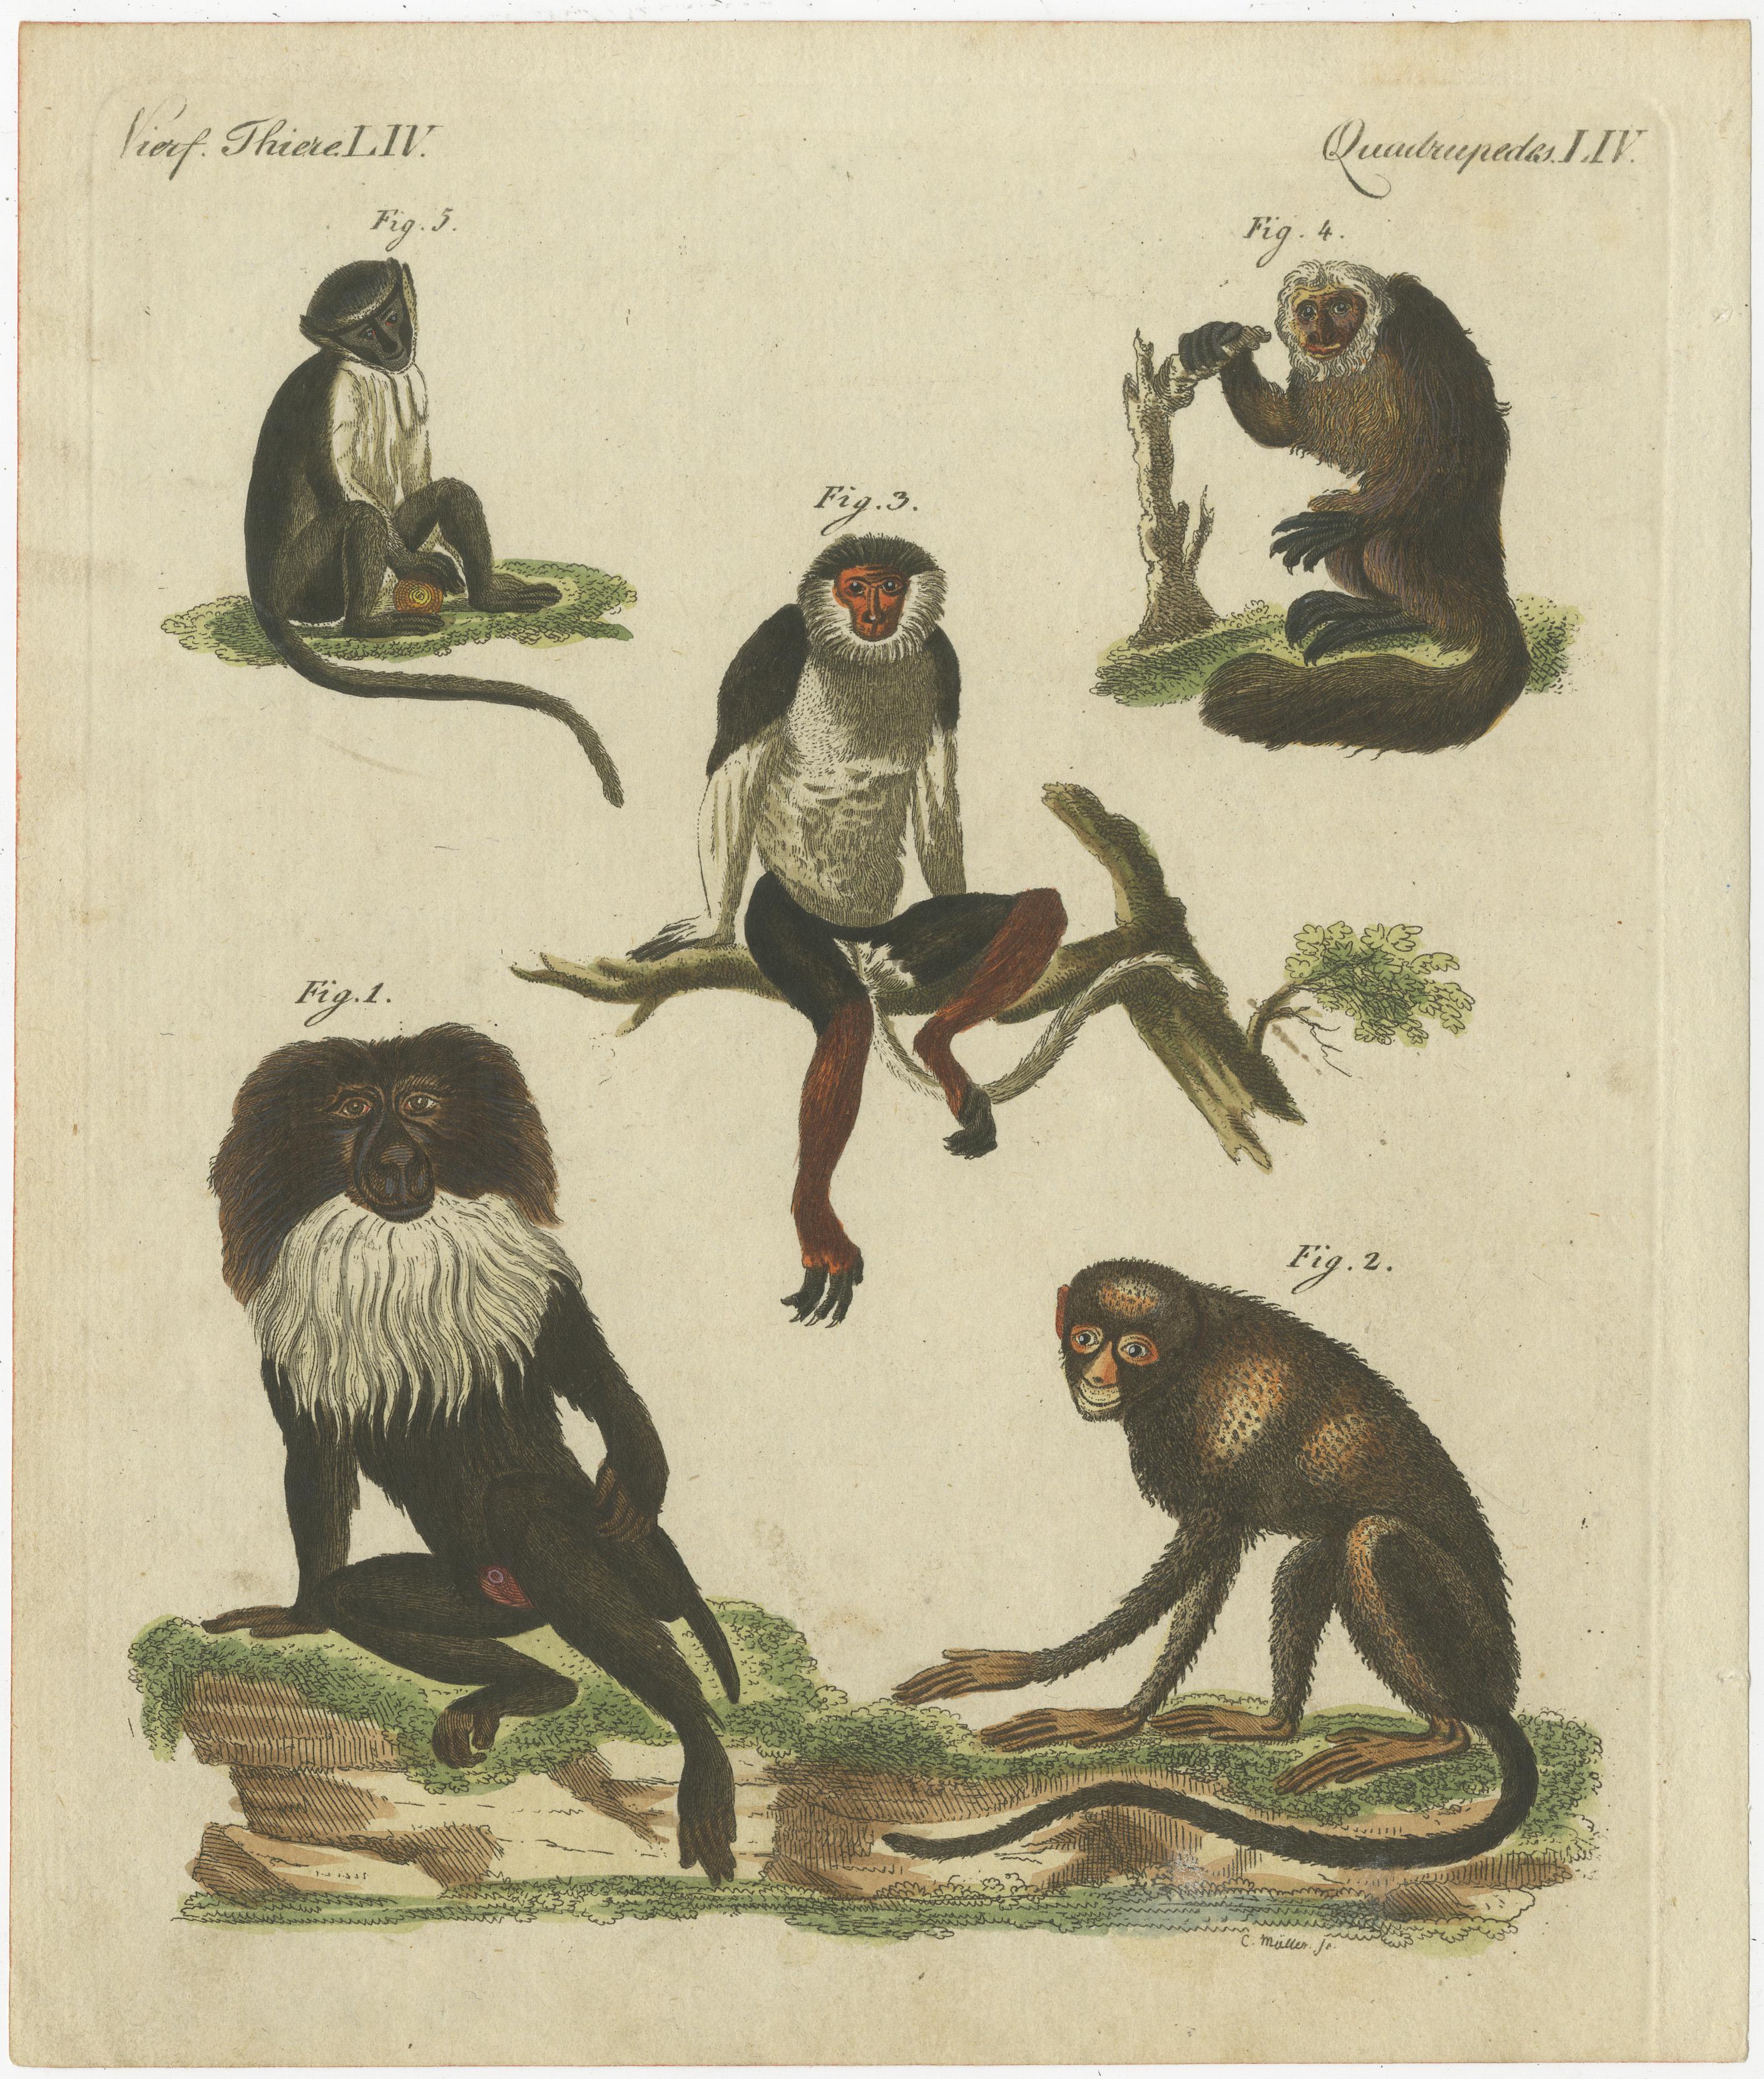 This original antique print shows the Lion-tailed macaque, Macaca silenus endangered 1, greater spot-nosed monkey, Cercopithecus nictitans 2, red-shanked douc, Pygathrix nemaeus endangered 3, white-faced saki, Pithecia pithecia 4, and roloway